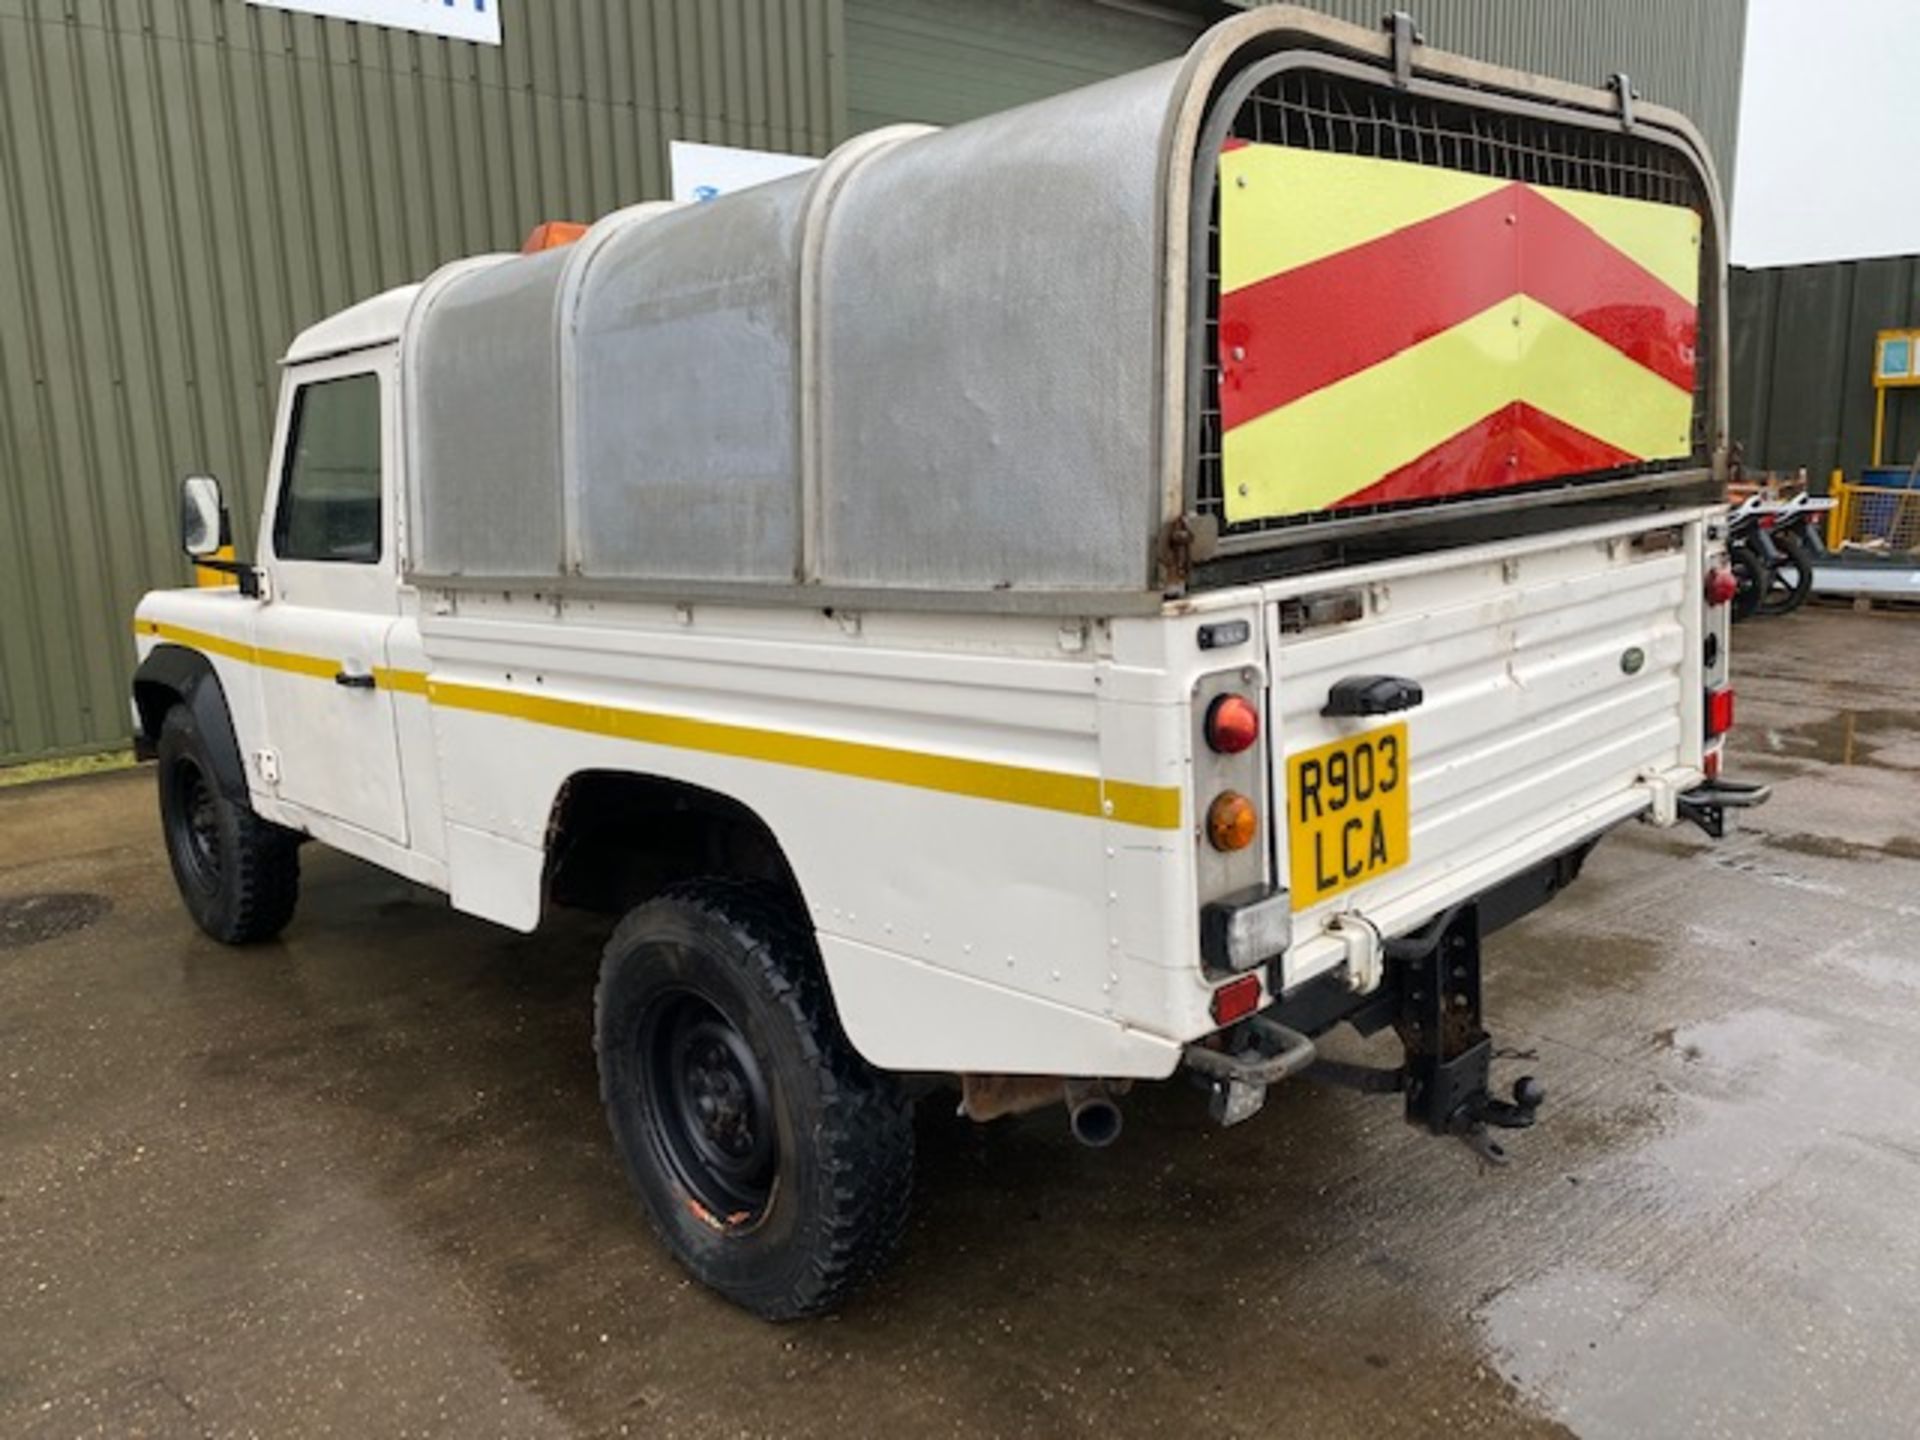 1 Owner Recent Release from UK Council 1998 Land Rover Defender 110 Hi-Capacity Pick Up - Image 10 of 41